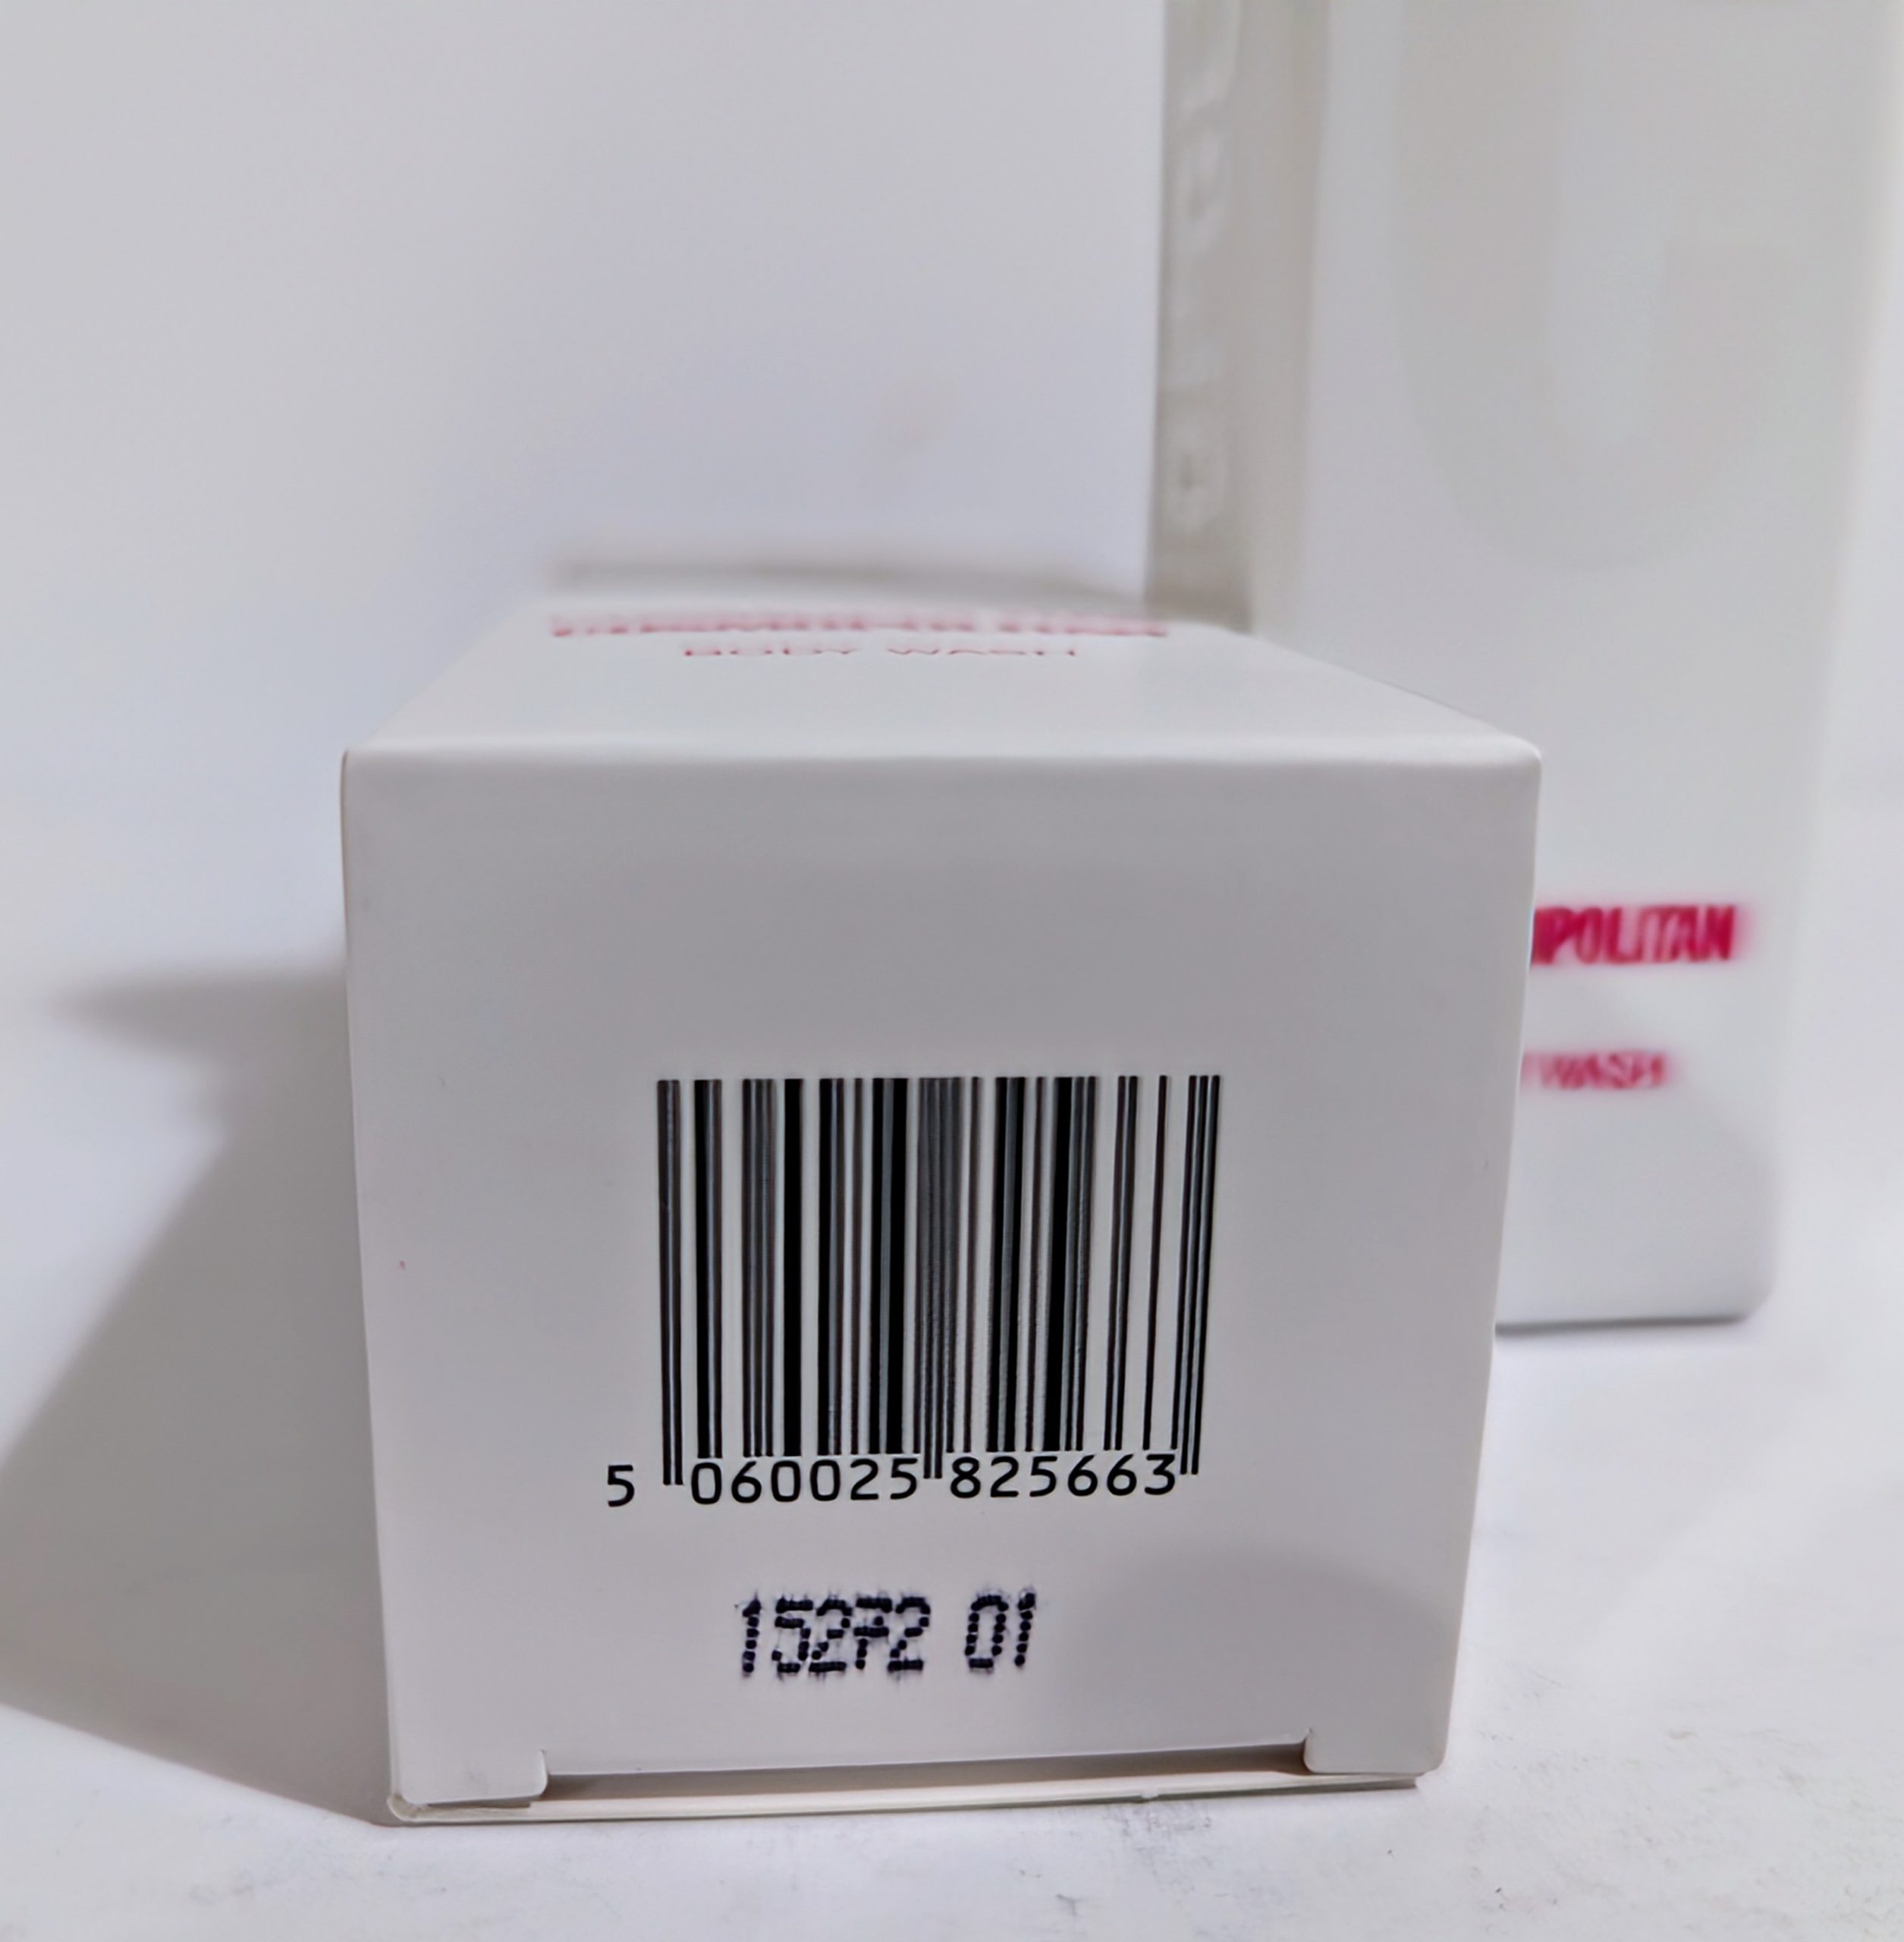 Close-up of a white box with a barcode labeled “5 060025 825663” and the number “15272 01” printed below.